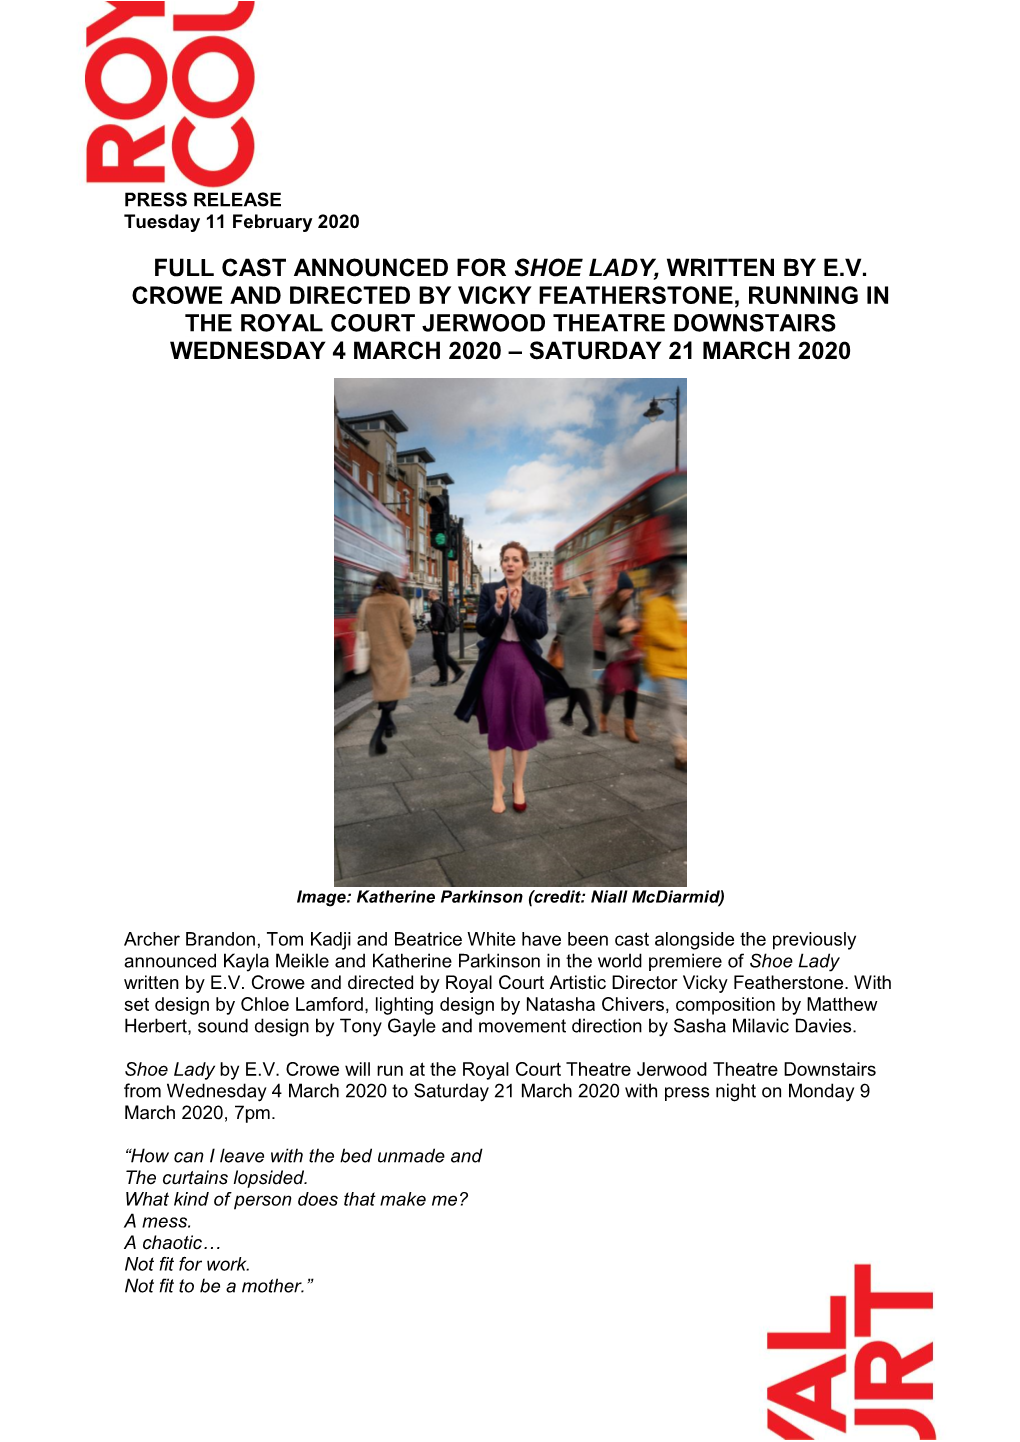 Full Cast Announced for Shoe Lady, Written by E.V. Crowe and Directed by Vicky Featherstone, Running in the Royal Court Jerwood